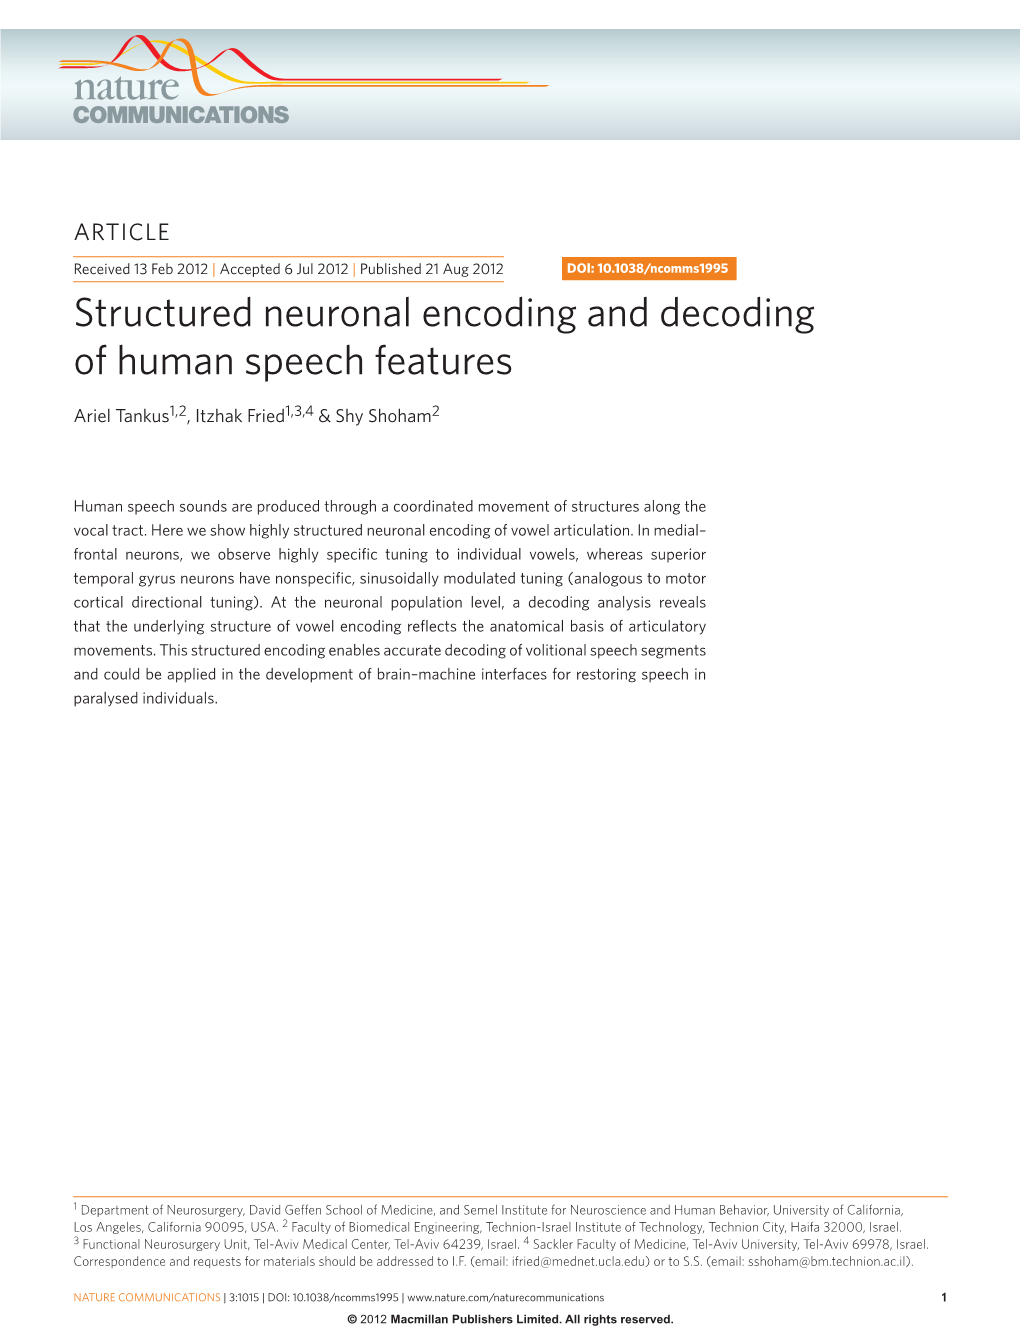 Structured Neuronal Encoding and Decoding of Human Speech Features